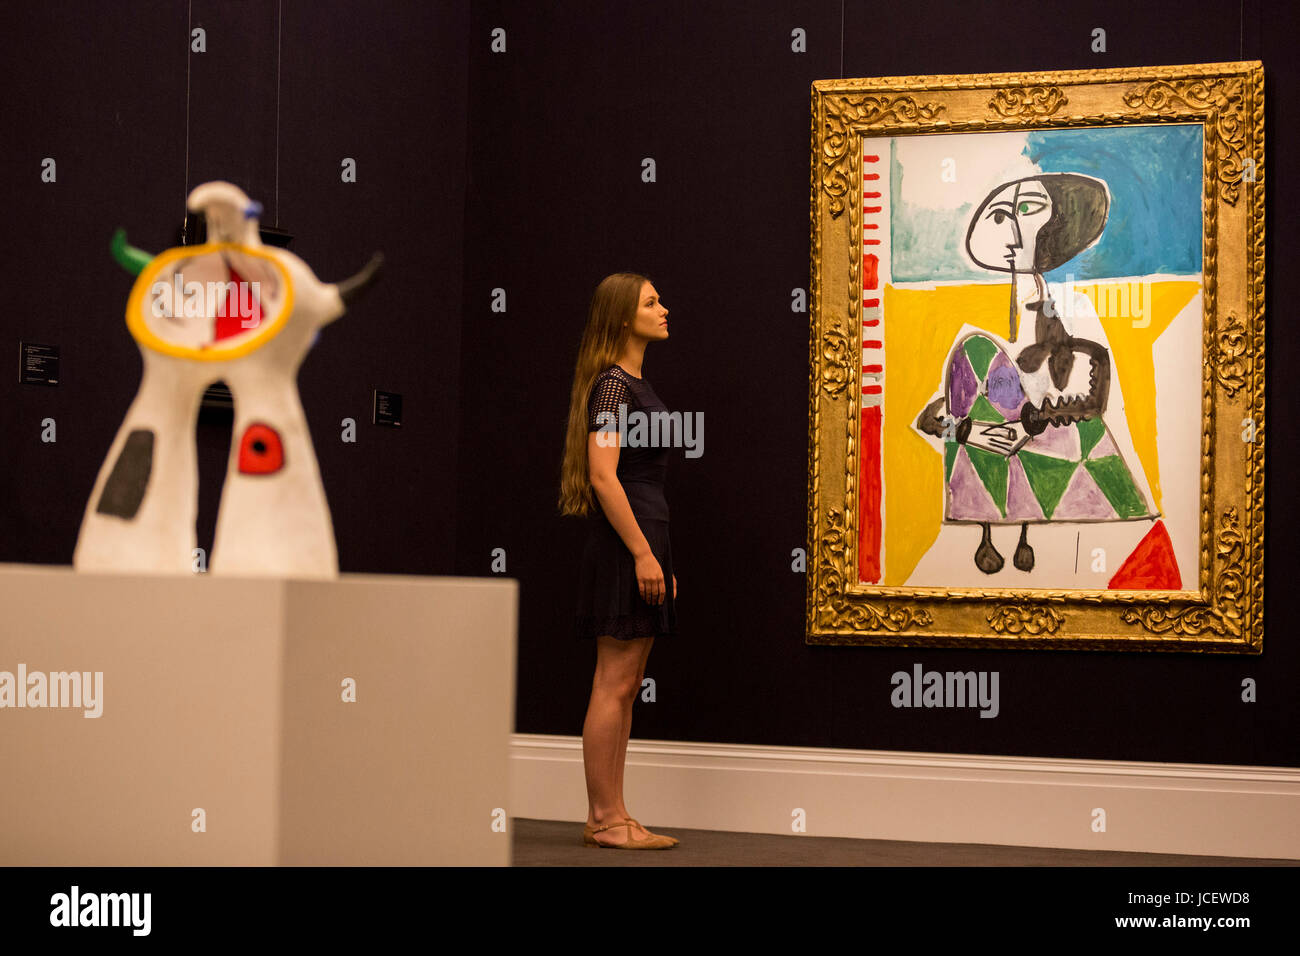 London, UK. 15 June 2017. Painting Femme accroupie by Pablo Picasso, 1954, est. GBP 6.5-8.5m and the sculpture Projet pour un monument by Joan Miro, 1972, est. GBP 800,000-1,200,000.  Auction house Sotheby's presents Landmarks int he Development of Modern Art to lead Sotheby's Impressionist & Modern Art Evening Sale on 21 June 2017. Stock Photo